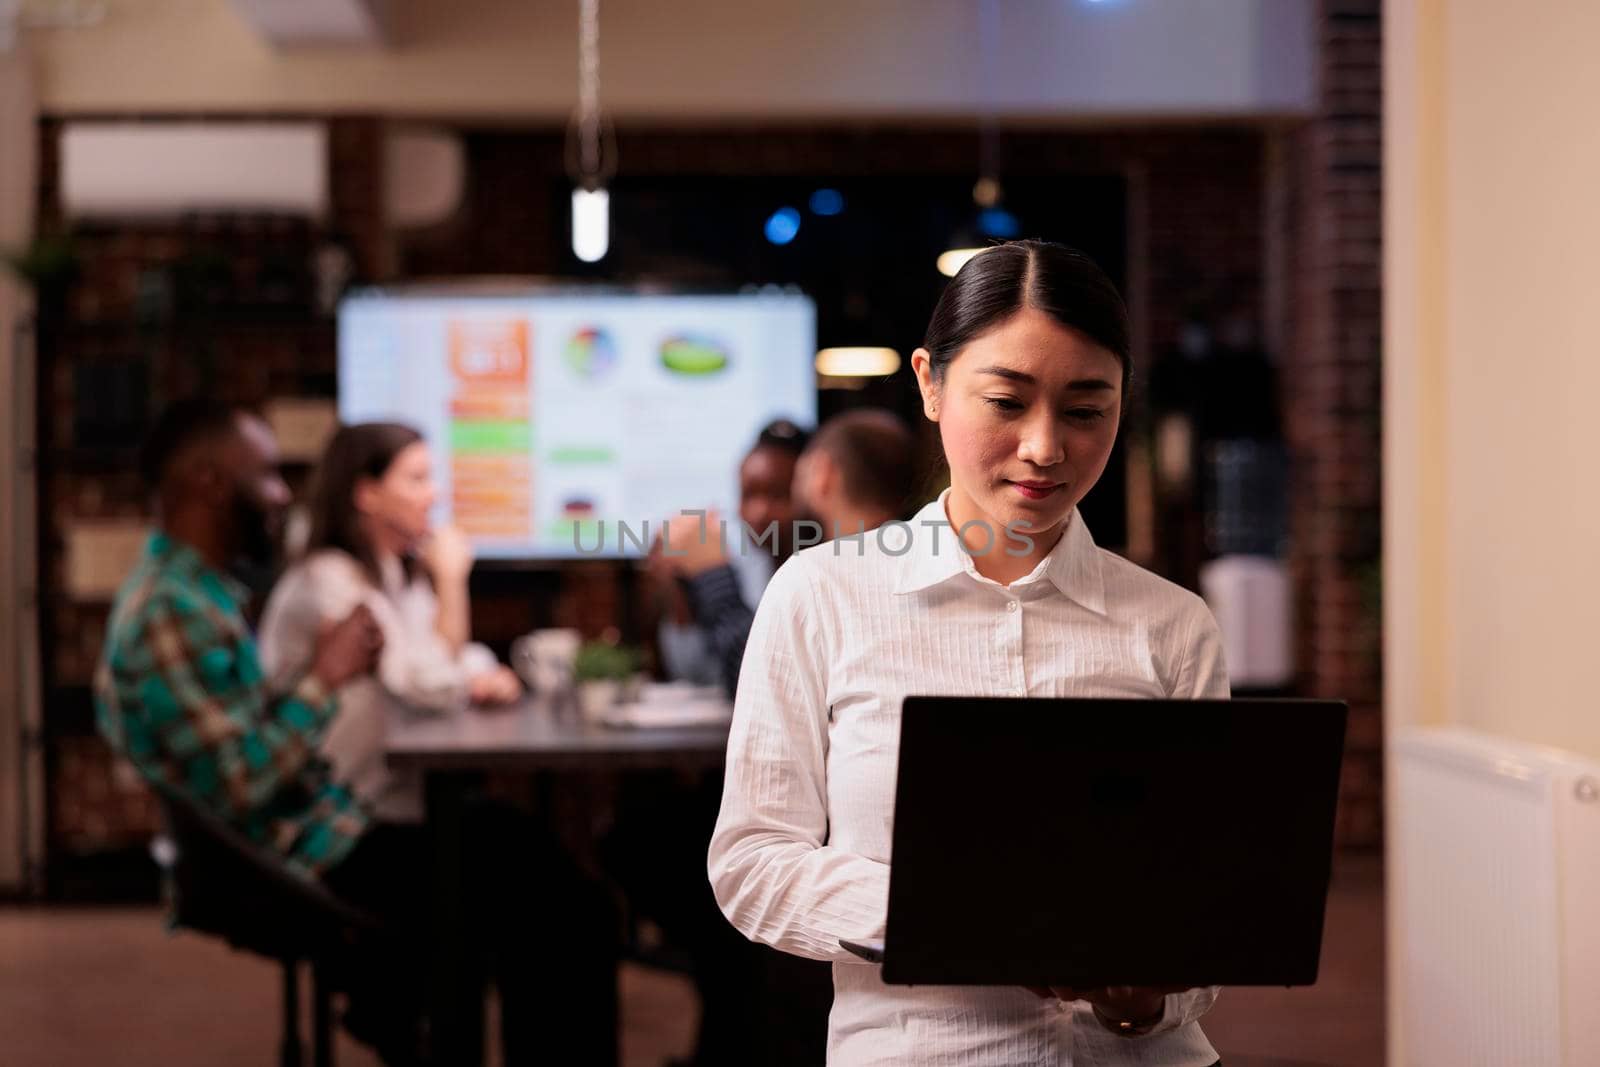 Focused asian woman holding laptop and looking at screen working late hours during business startegy meeting with mixed team. Startup employee posing confident in group project with coworkers.